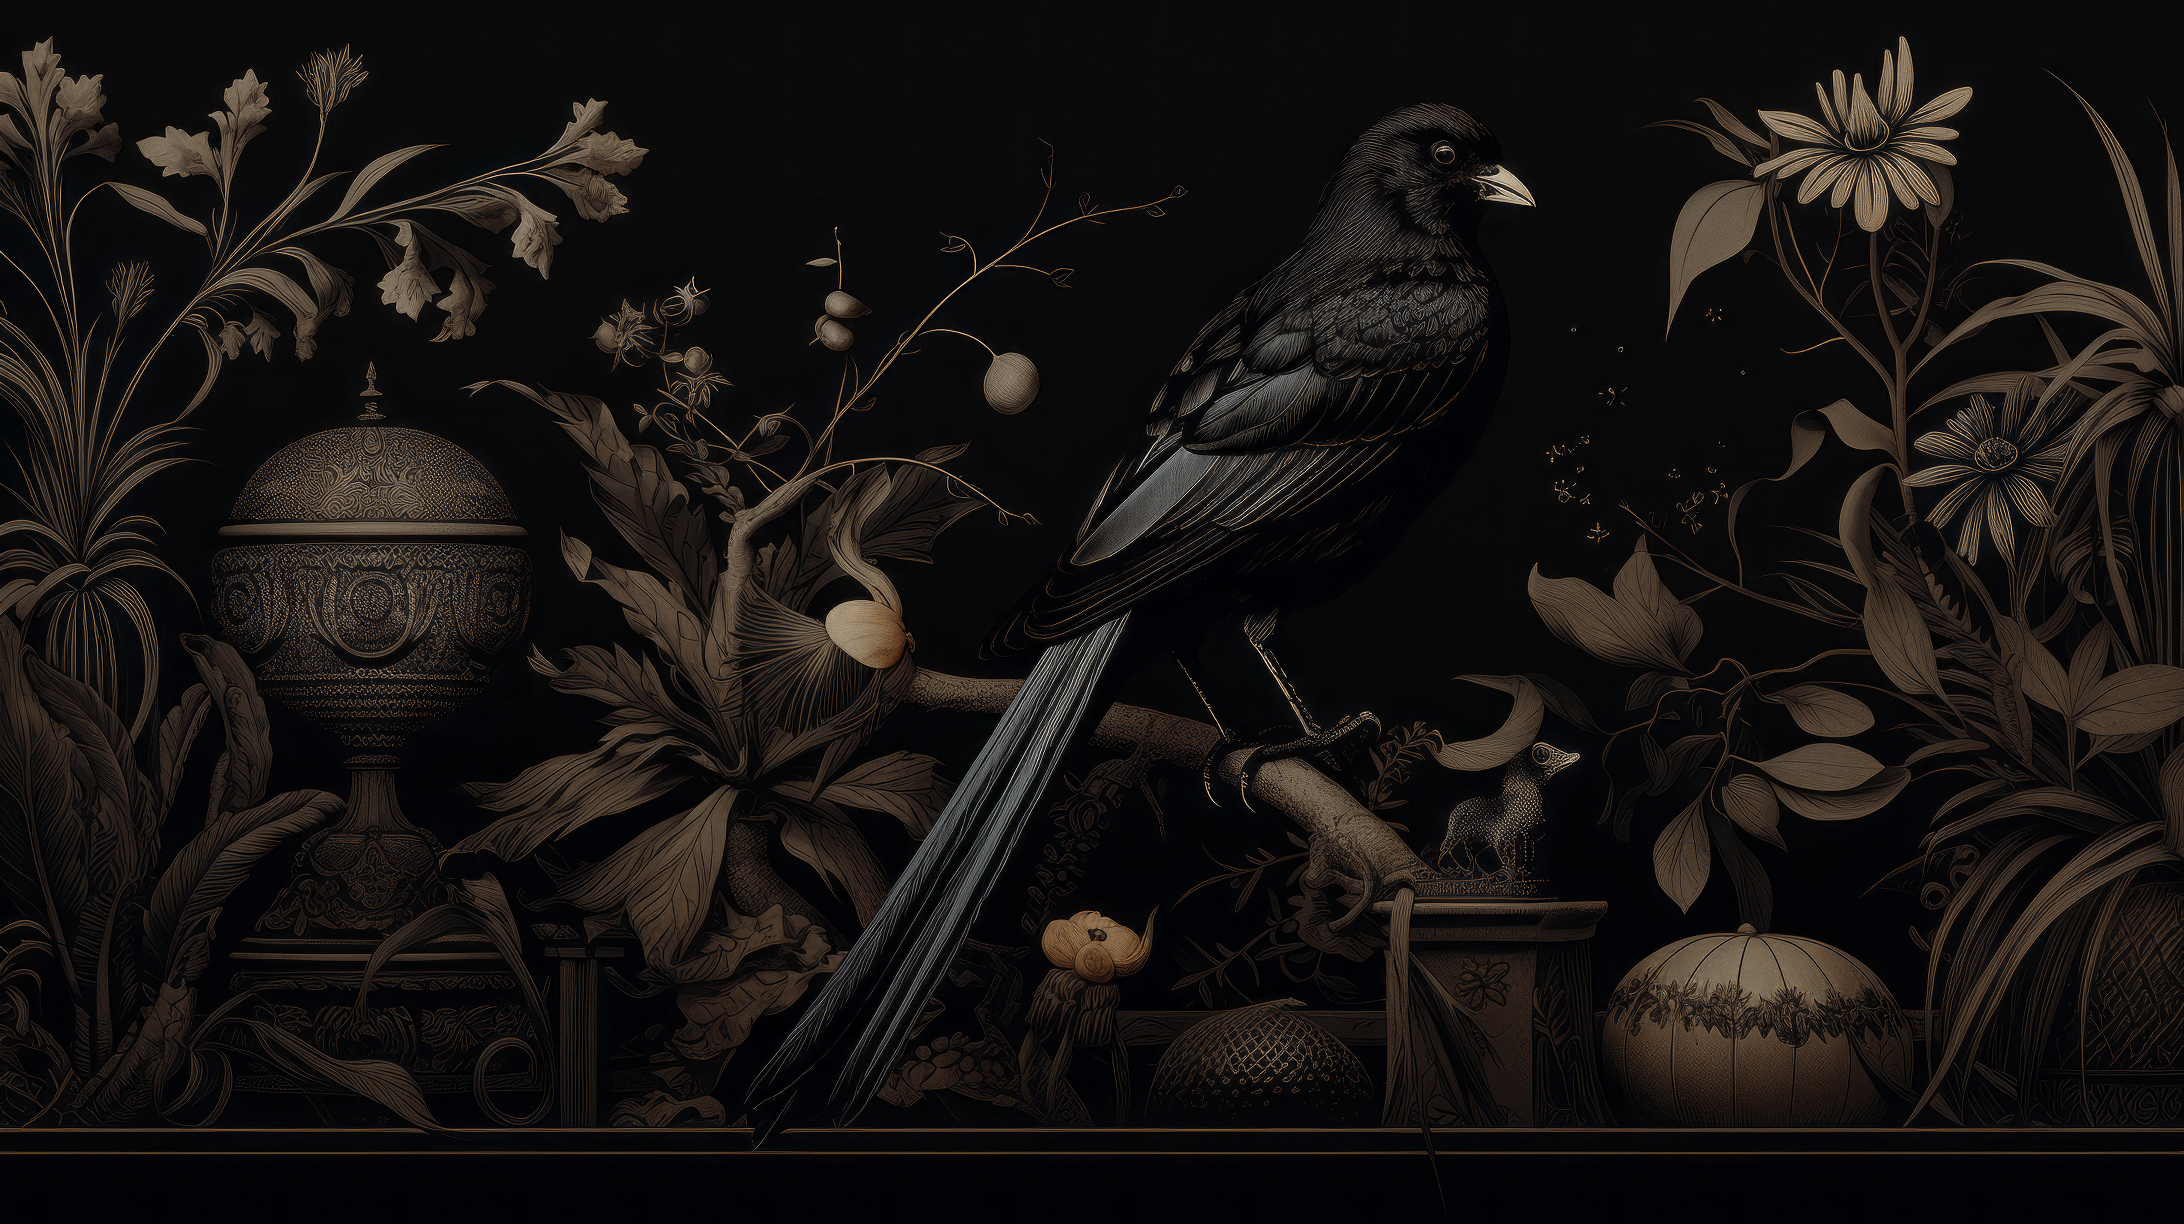 A black crow sitting on a branch surrounded by flowers and plants. - Feathers